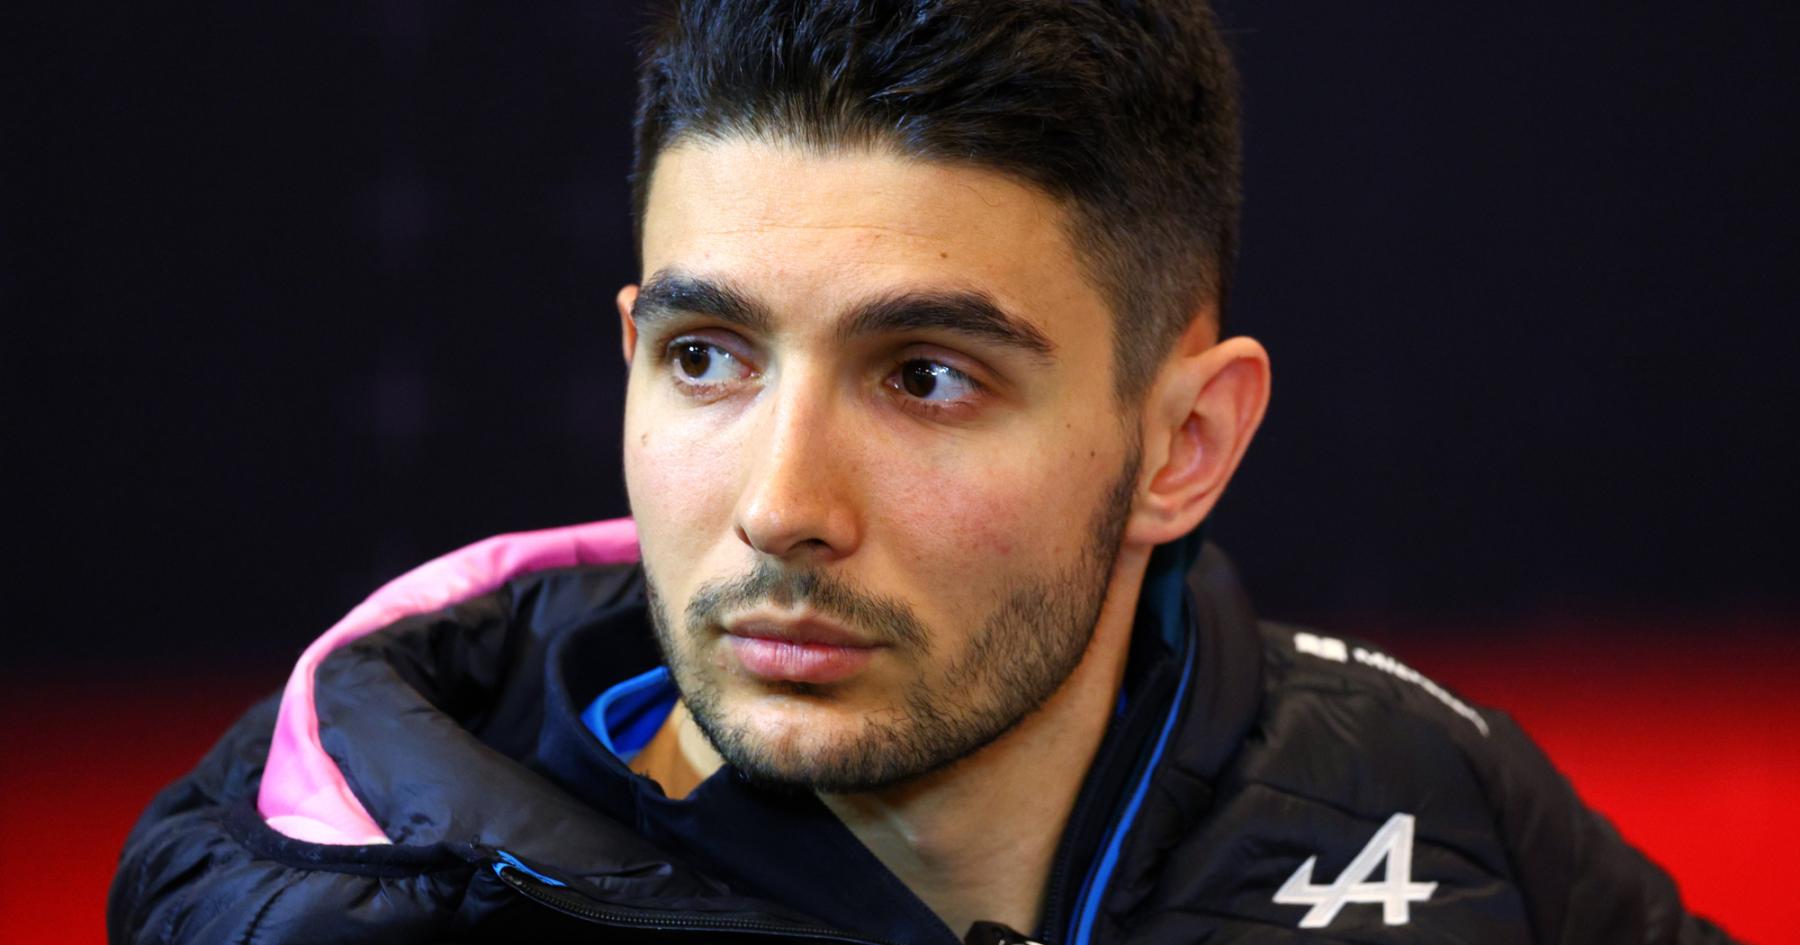 Resilient Ocon Condemns Misrepresentation in Bold Stand